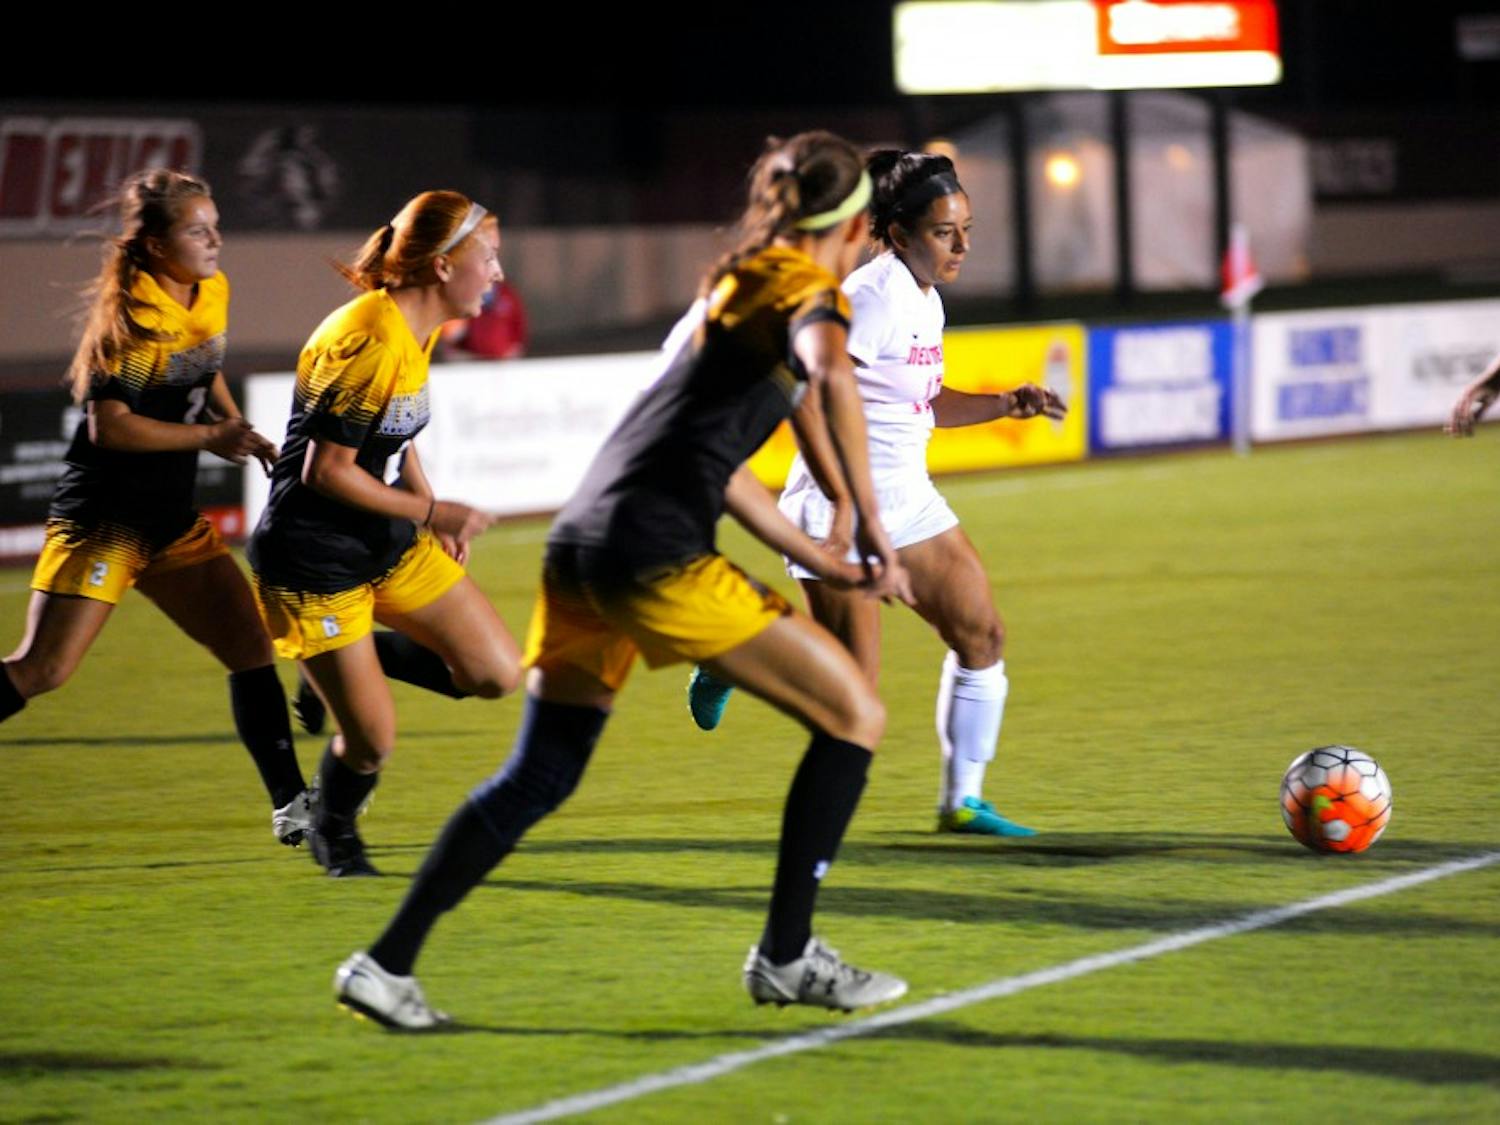 Lobos senior defender&nbsp;Olivia Ferrier works to get the ball away from a swarm of Colorado College players on Friday, Sept. 23, 2016 at the UNM Soccer Complex. The Lobos lost to Colorado College 1-0 to open Mountain West play.&nbsp;